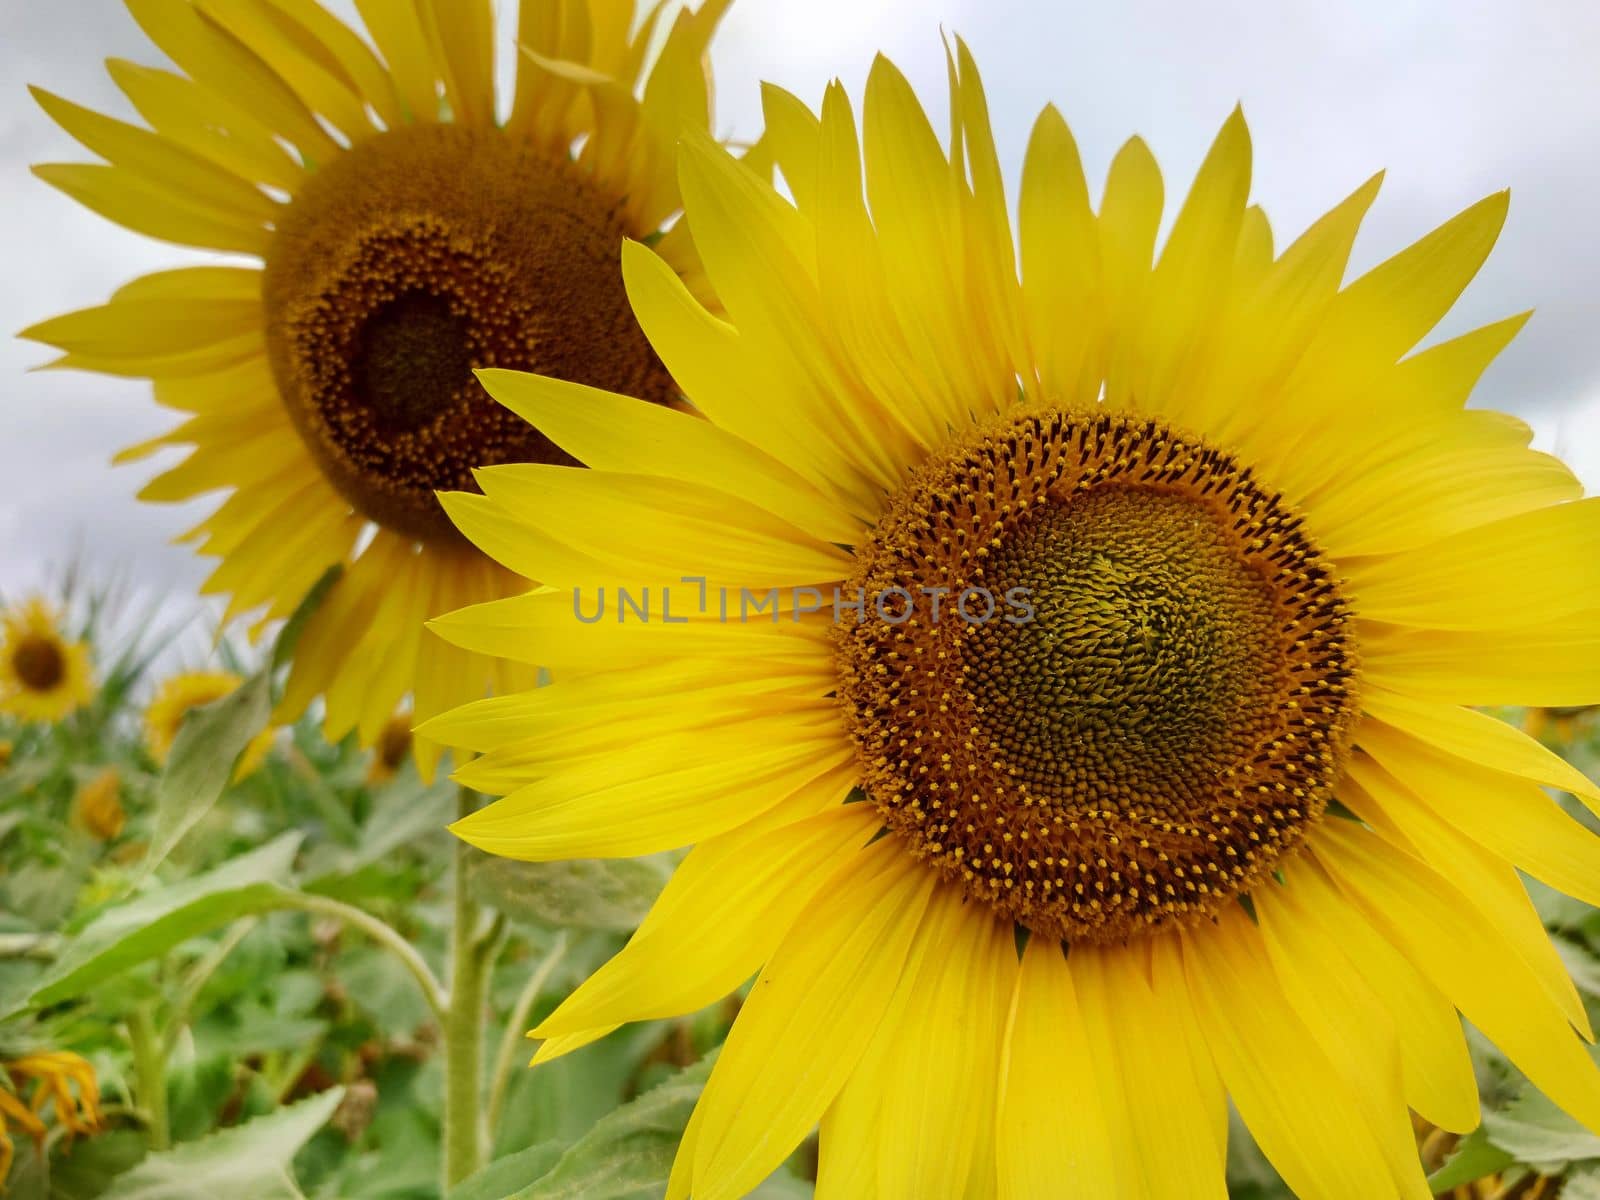 Two yellow sunflowers in full bloom on a cloudy day close-up.Texture or background